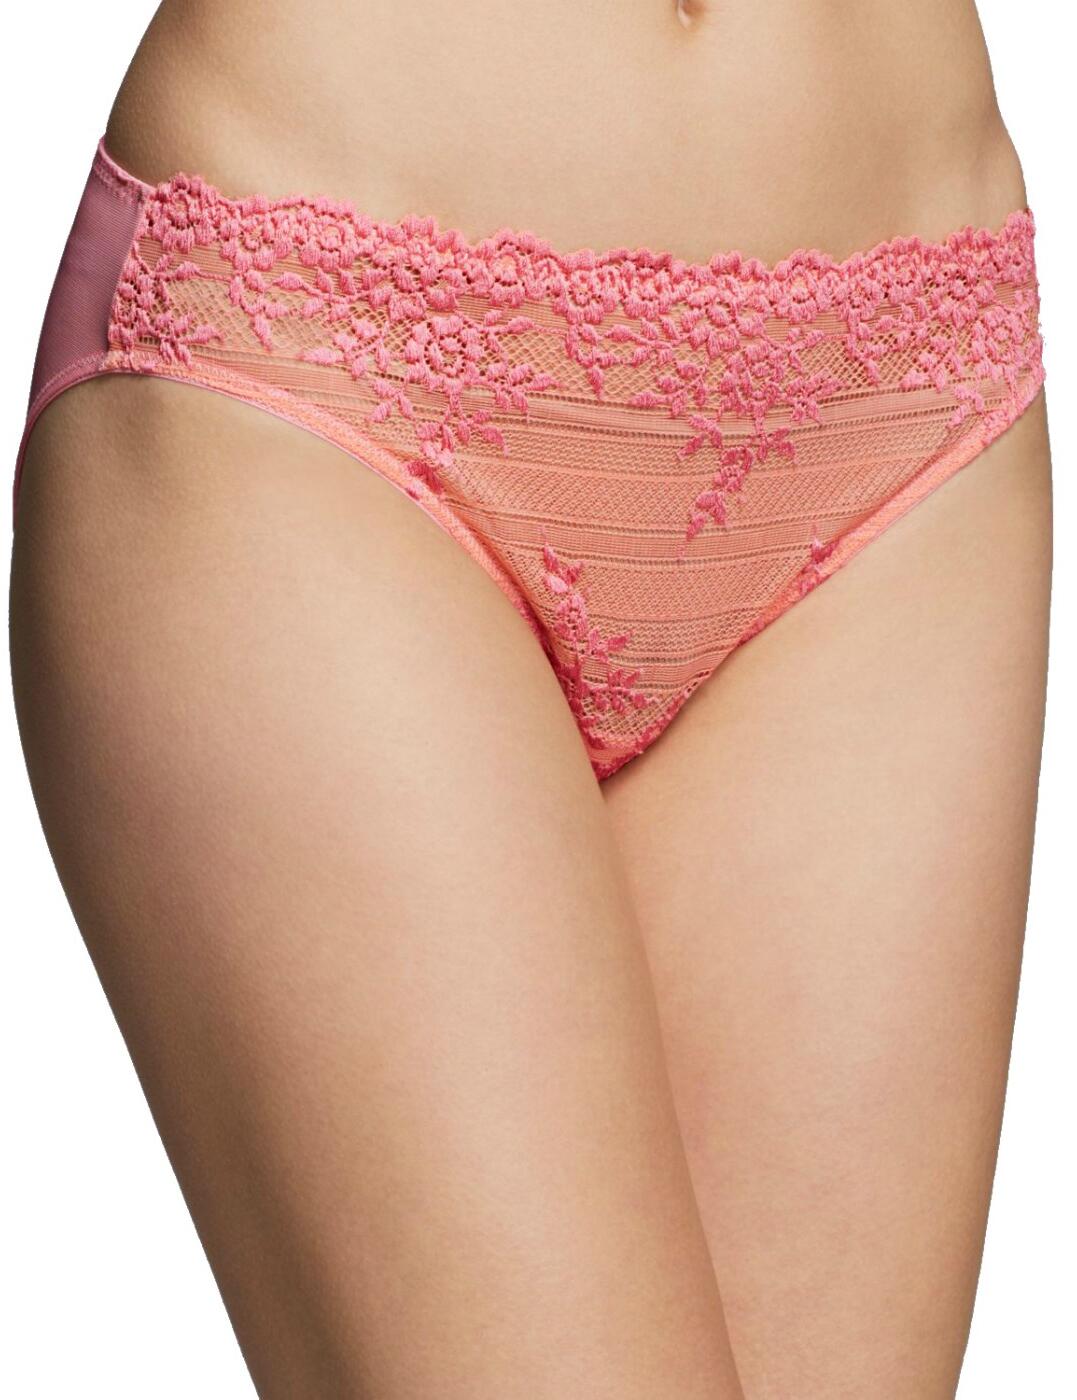 064391 Wacoal Embrace Lace Brief - 064391 Pink/Coral